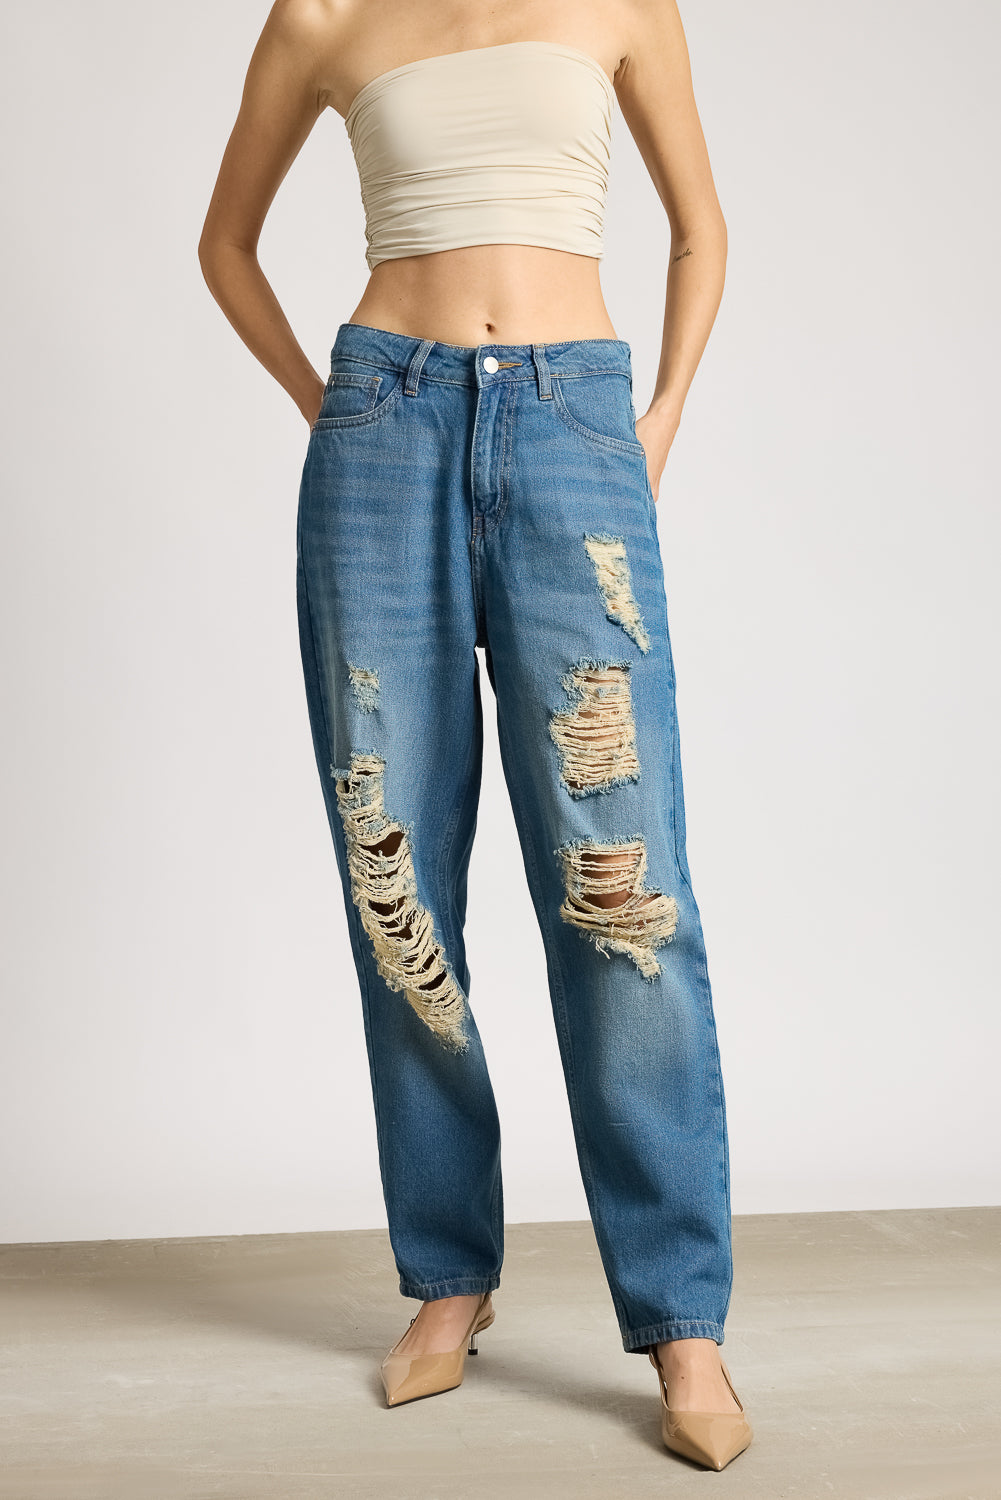 RELAXED FIT RUSTIC RIPPED DENIM